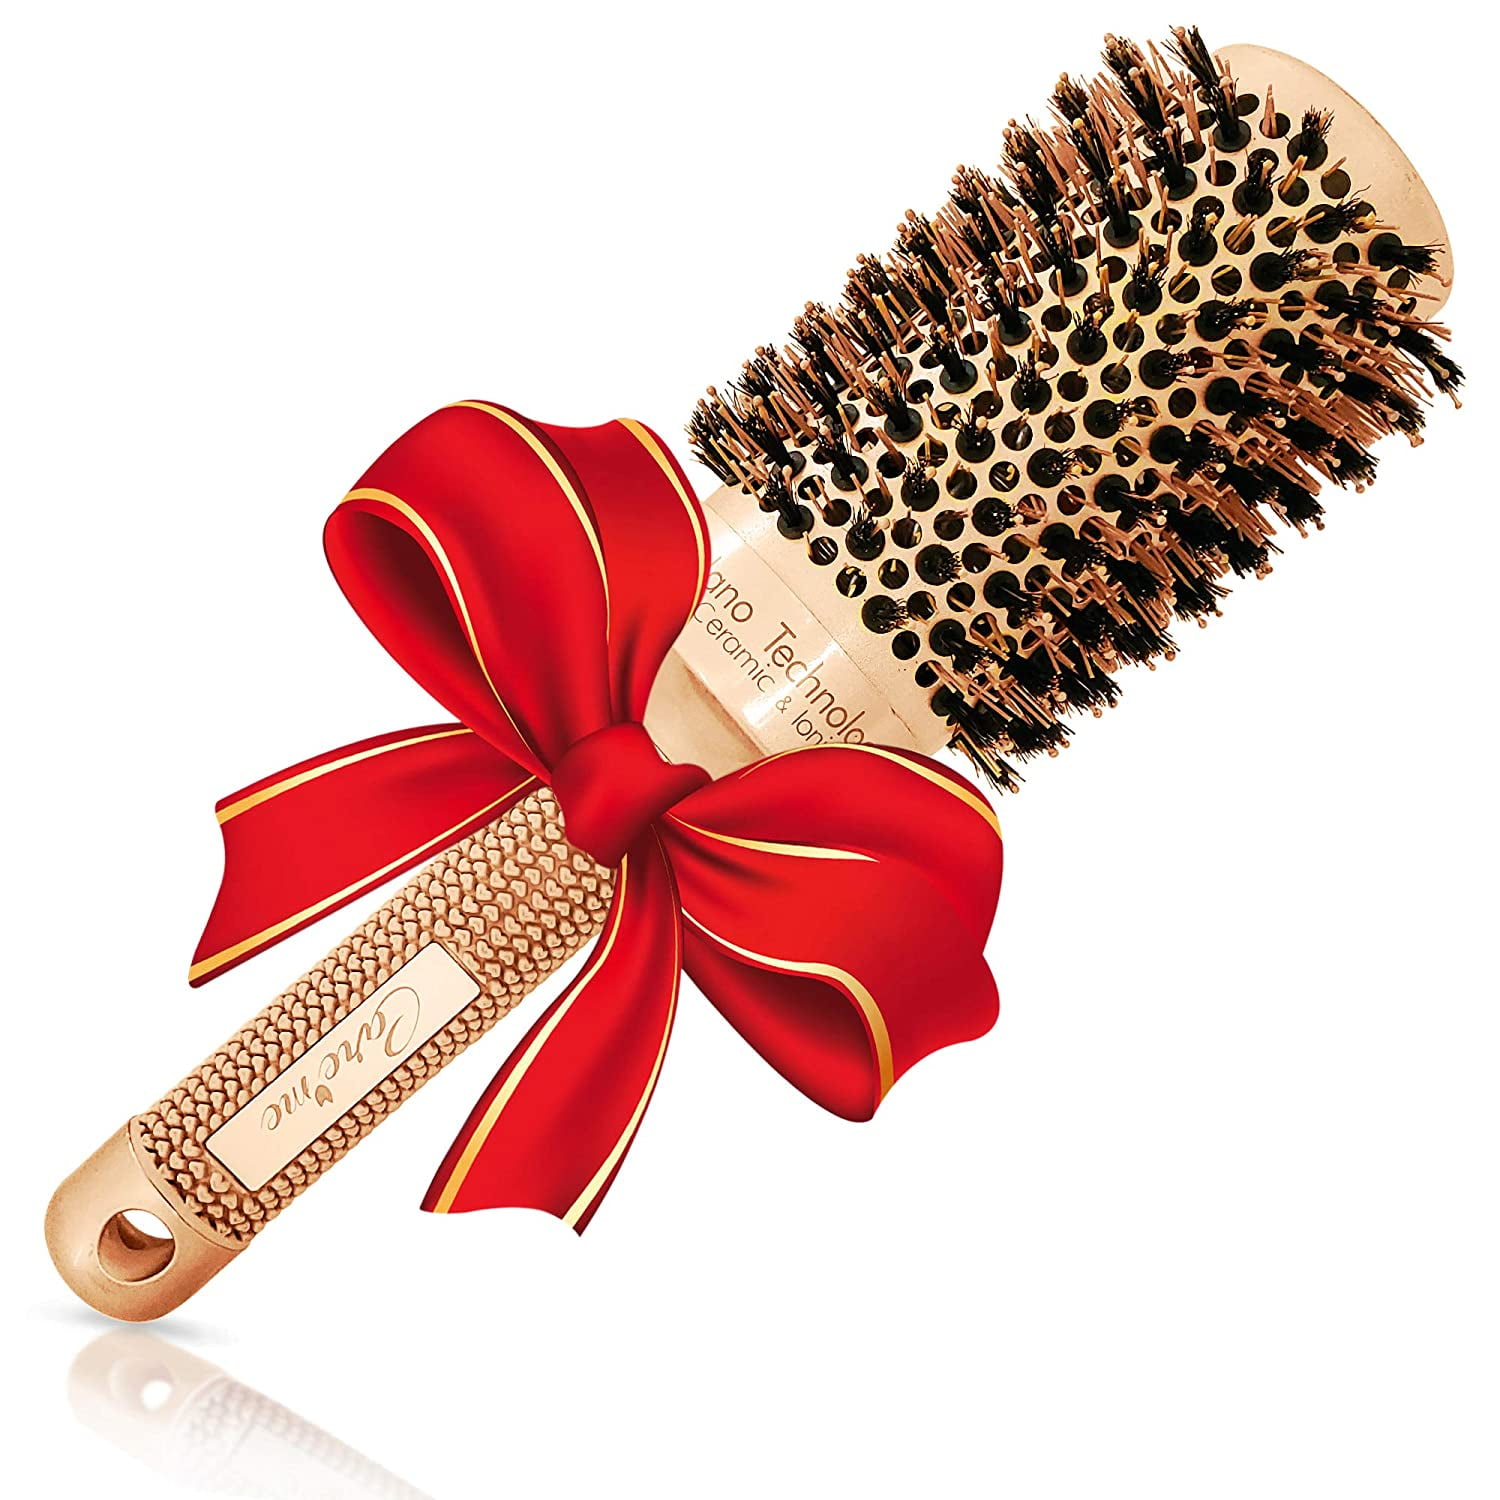 Care me Blow Dry Round Hair Brush with Boar Bristles (2 inch Core) -  Professional Styling Brush for Salon-Like Shiny Frizz-Free Blowouts -  